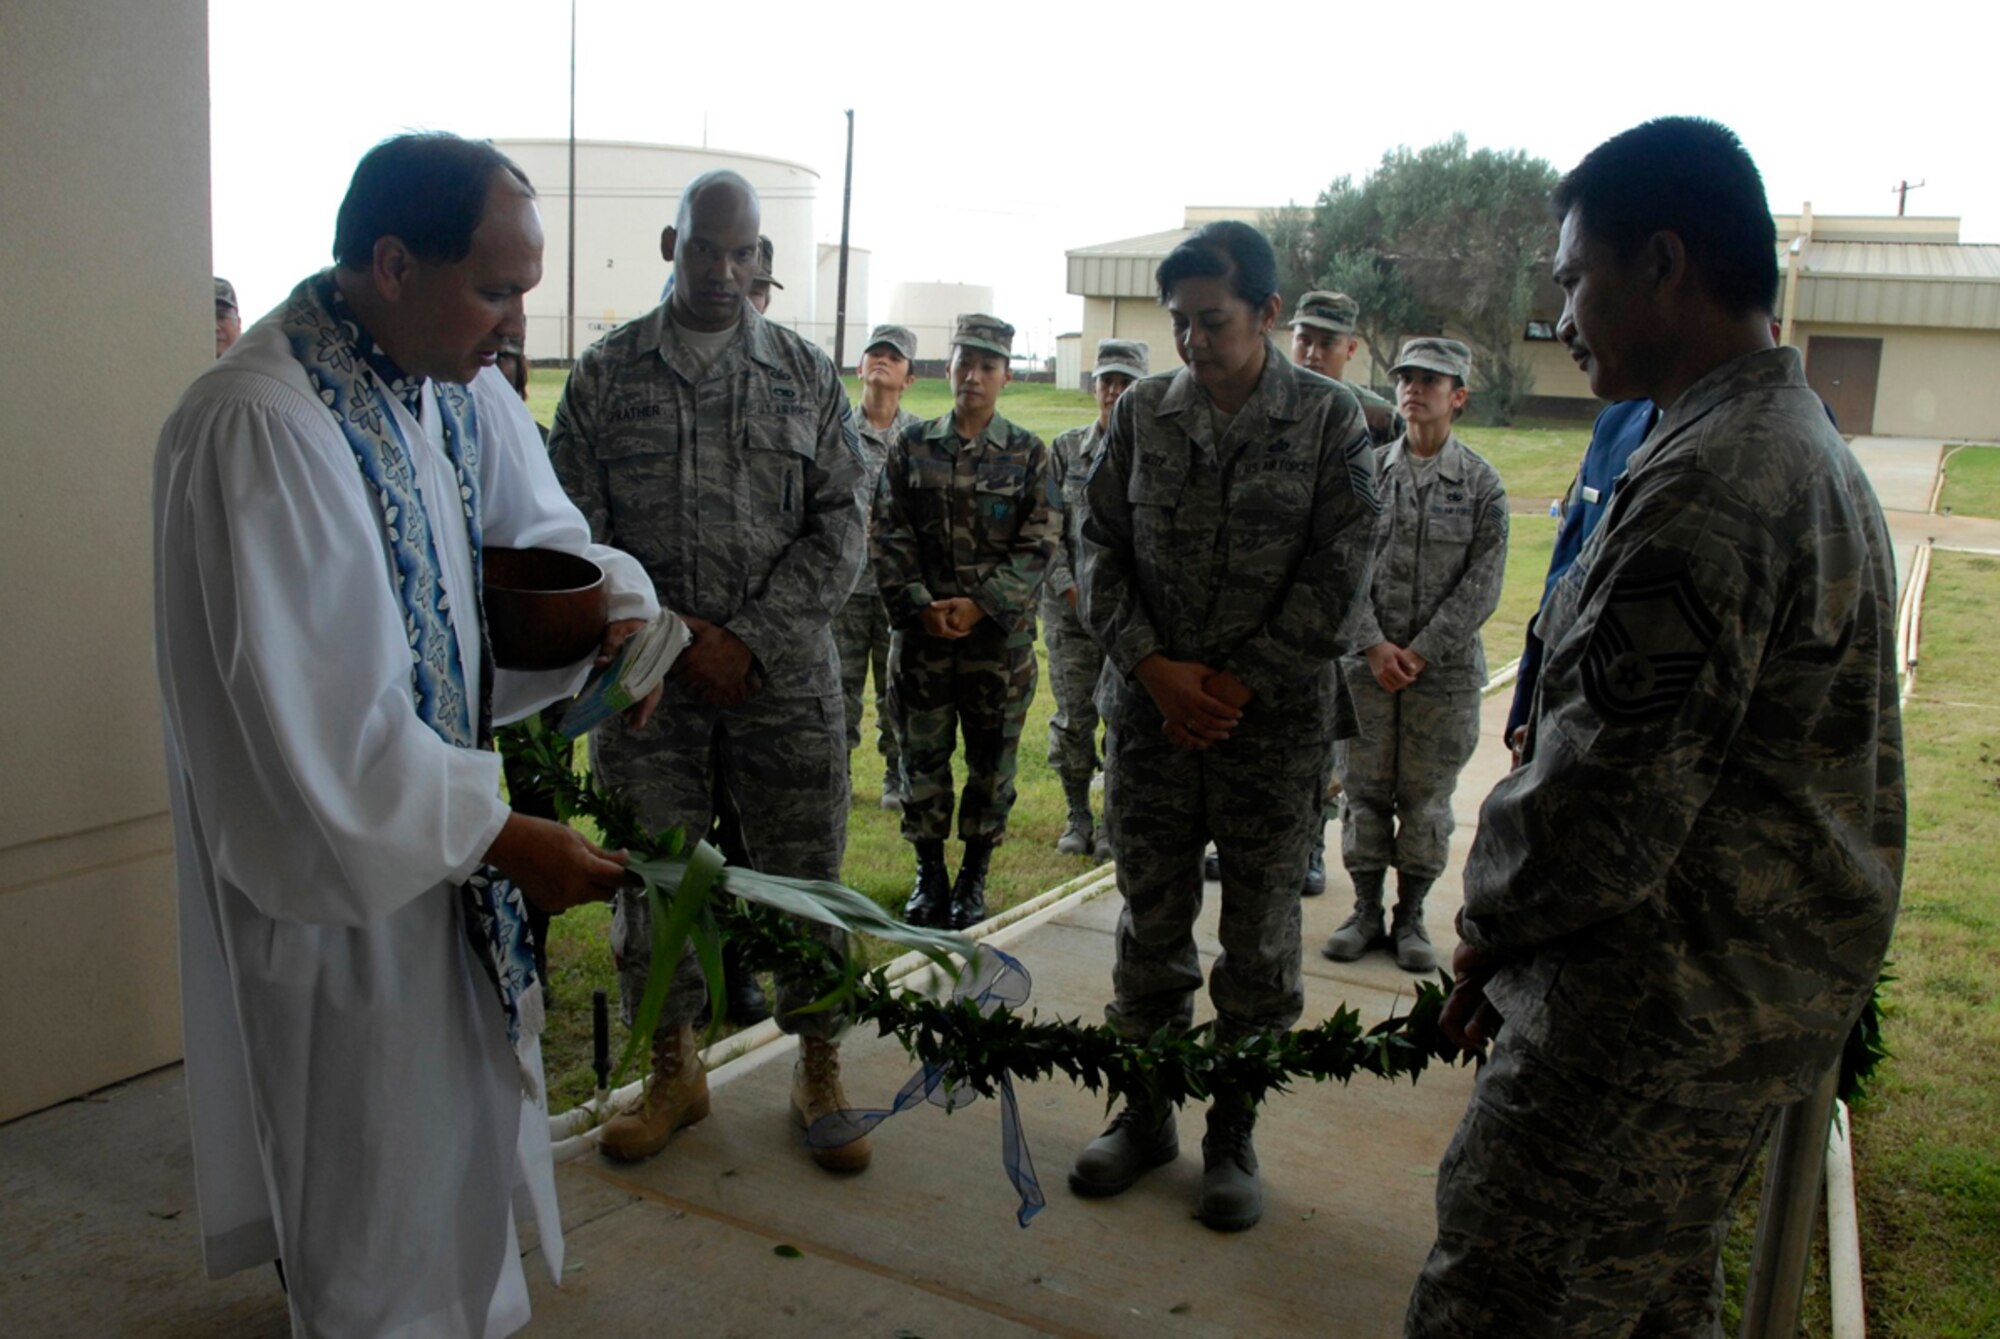 Kahu Kordell Kedoa, a pastor from Kamehameha Schools in Honolulu, blesses a maile lei as part of a Hawaiian blessing ceremony commemorating the opening of a new building for the 624th Regional Support Group December 7, 2008 at Hickam Air Force Base, Hawaii.  The building represents the first structure build specifically for the 624th RSG on the base.  (U.S. Air Force photo by Staff Sgt. Jennie Chamberlin)  
